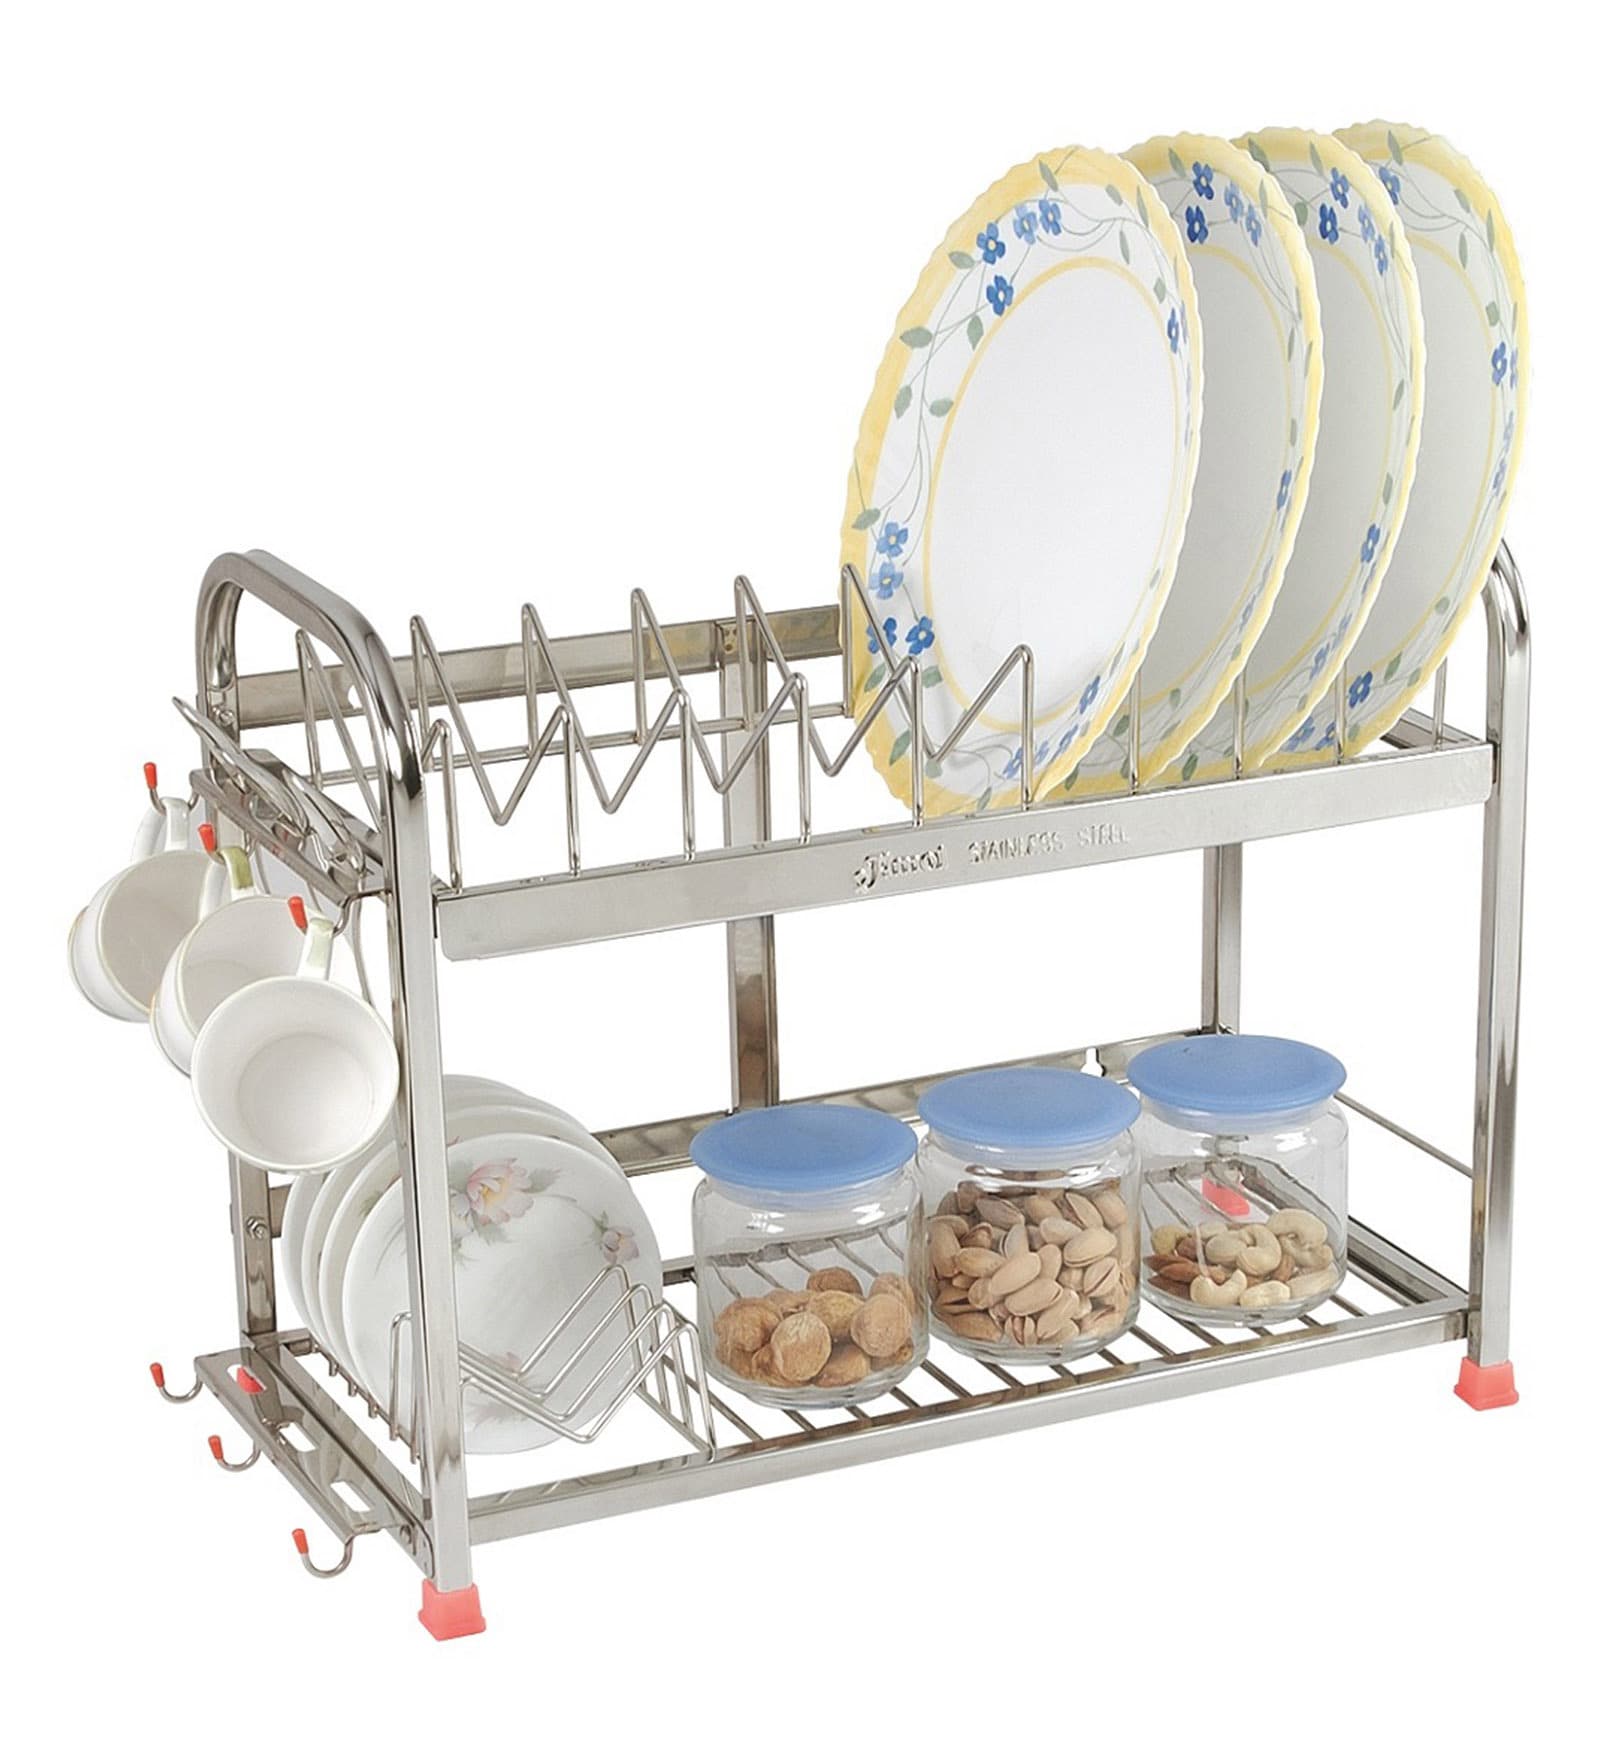 Buy Stainless Steel 15 x 9 Inches Kitchen Racks By Amol at 30% OFF by Amol